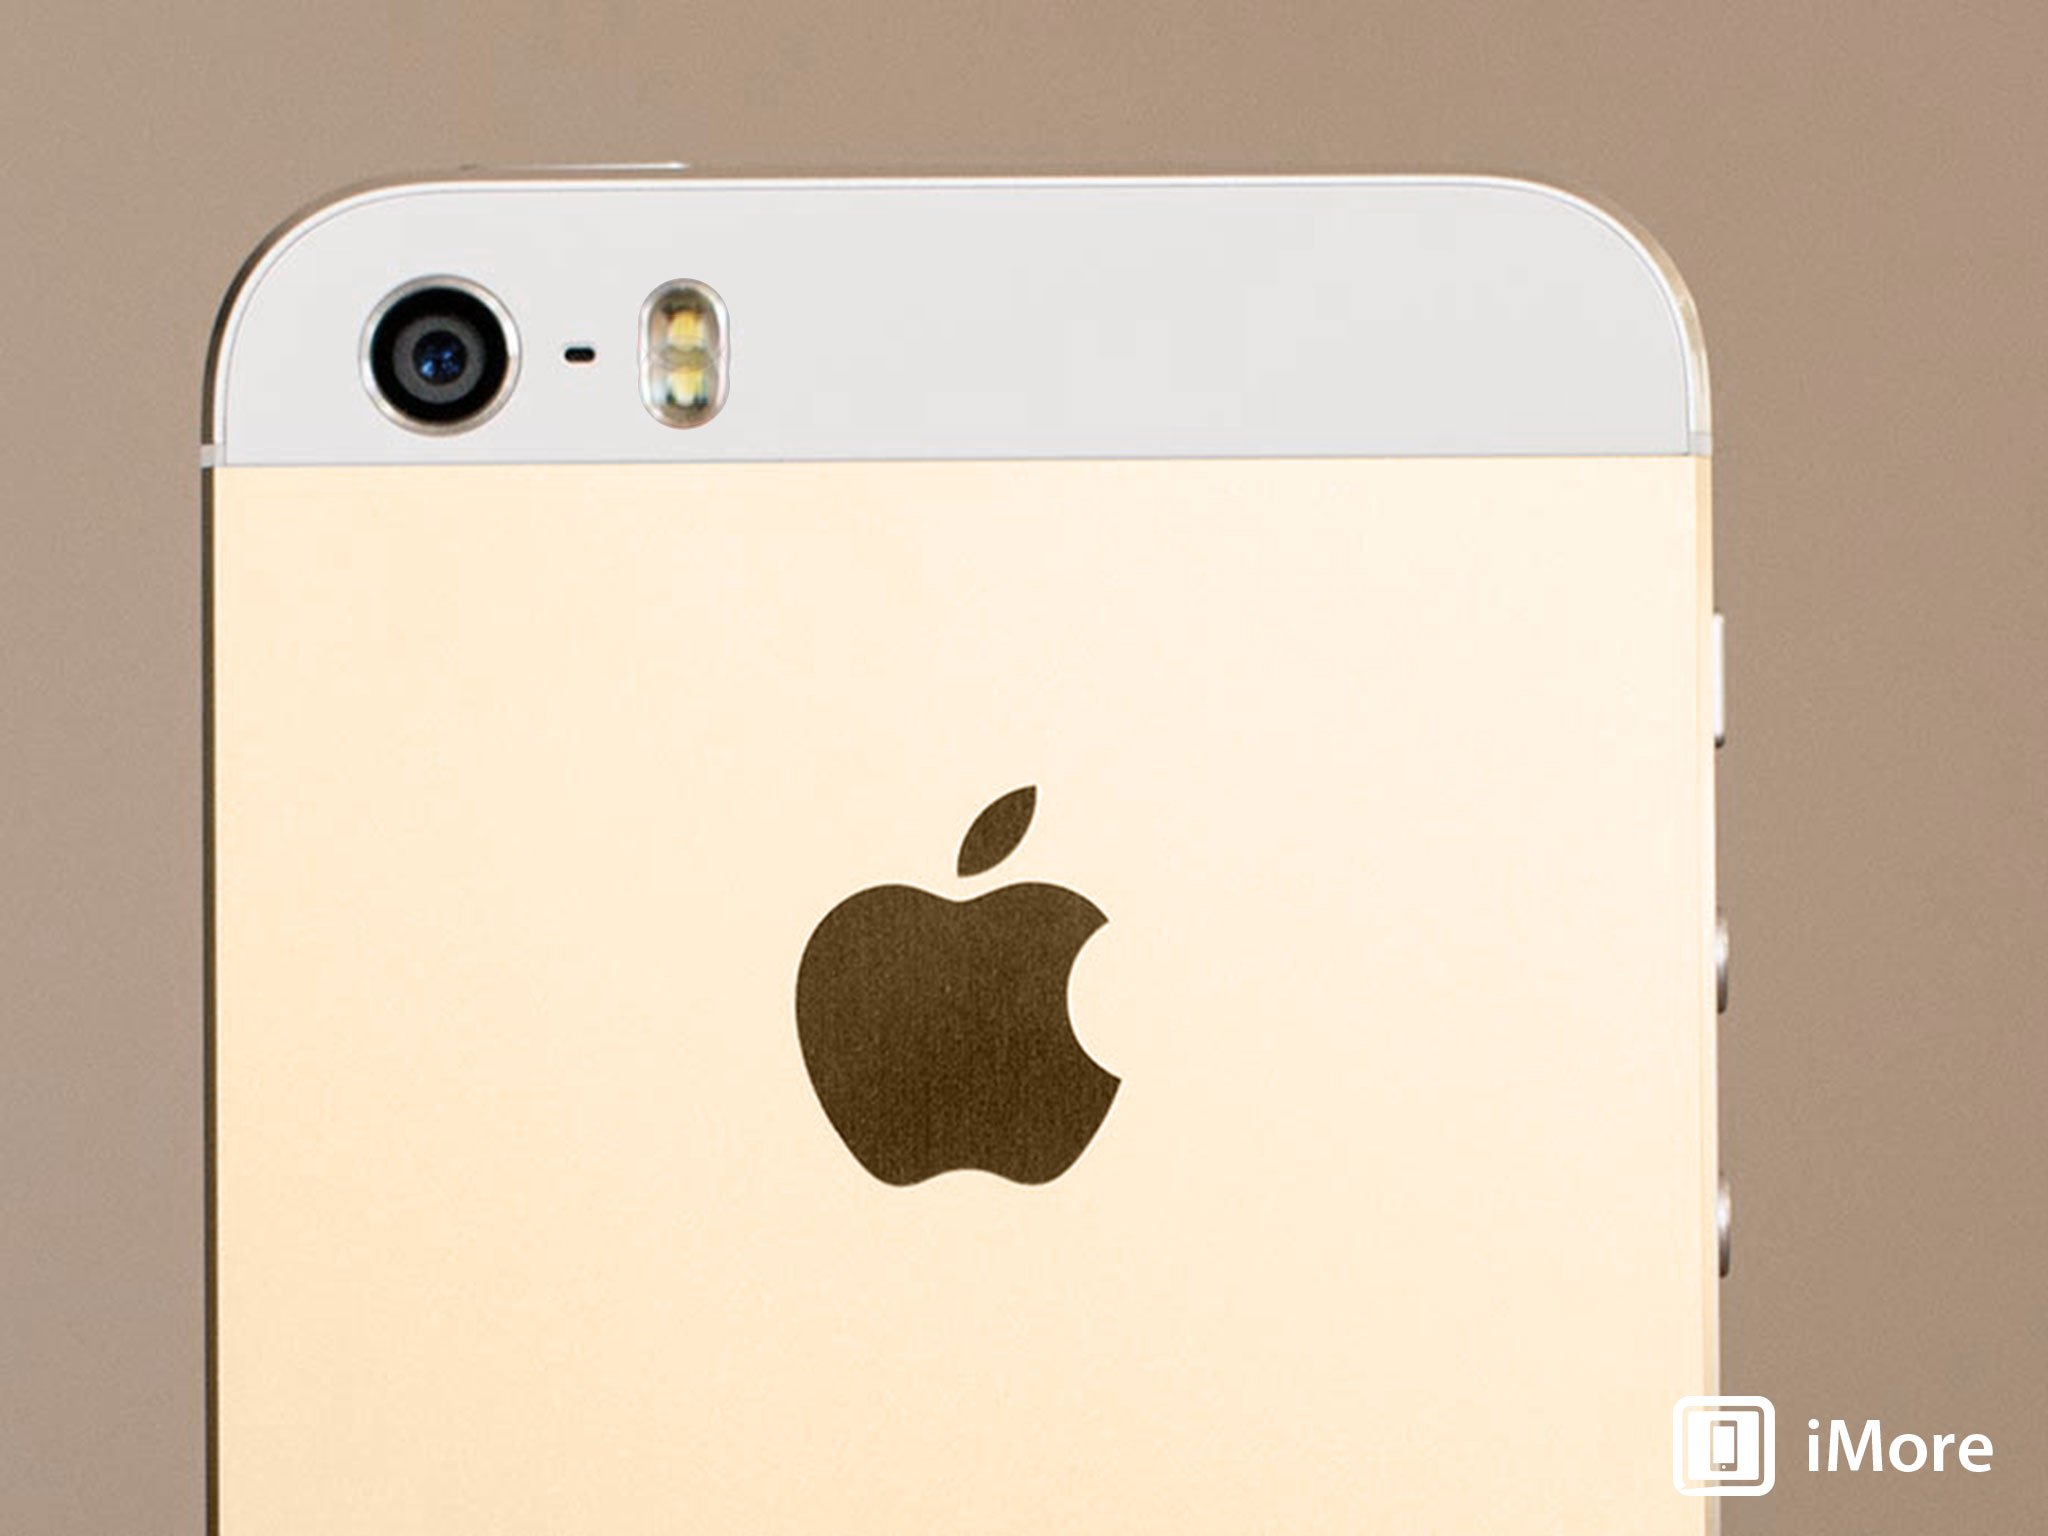 Imagining iPhone 5s and iPhone 5c: iSight and FaceTime cameras